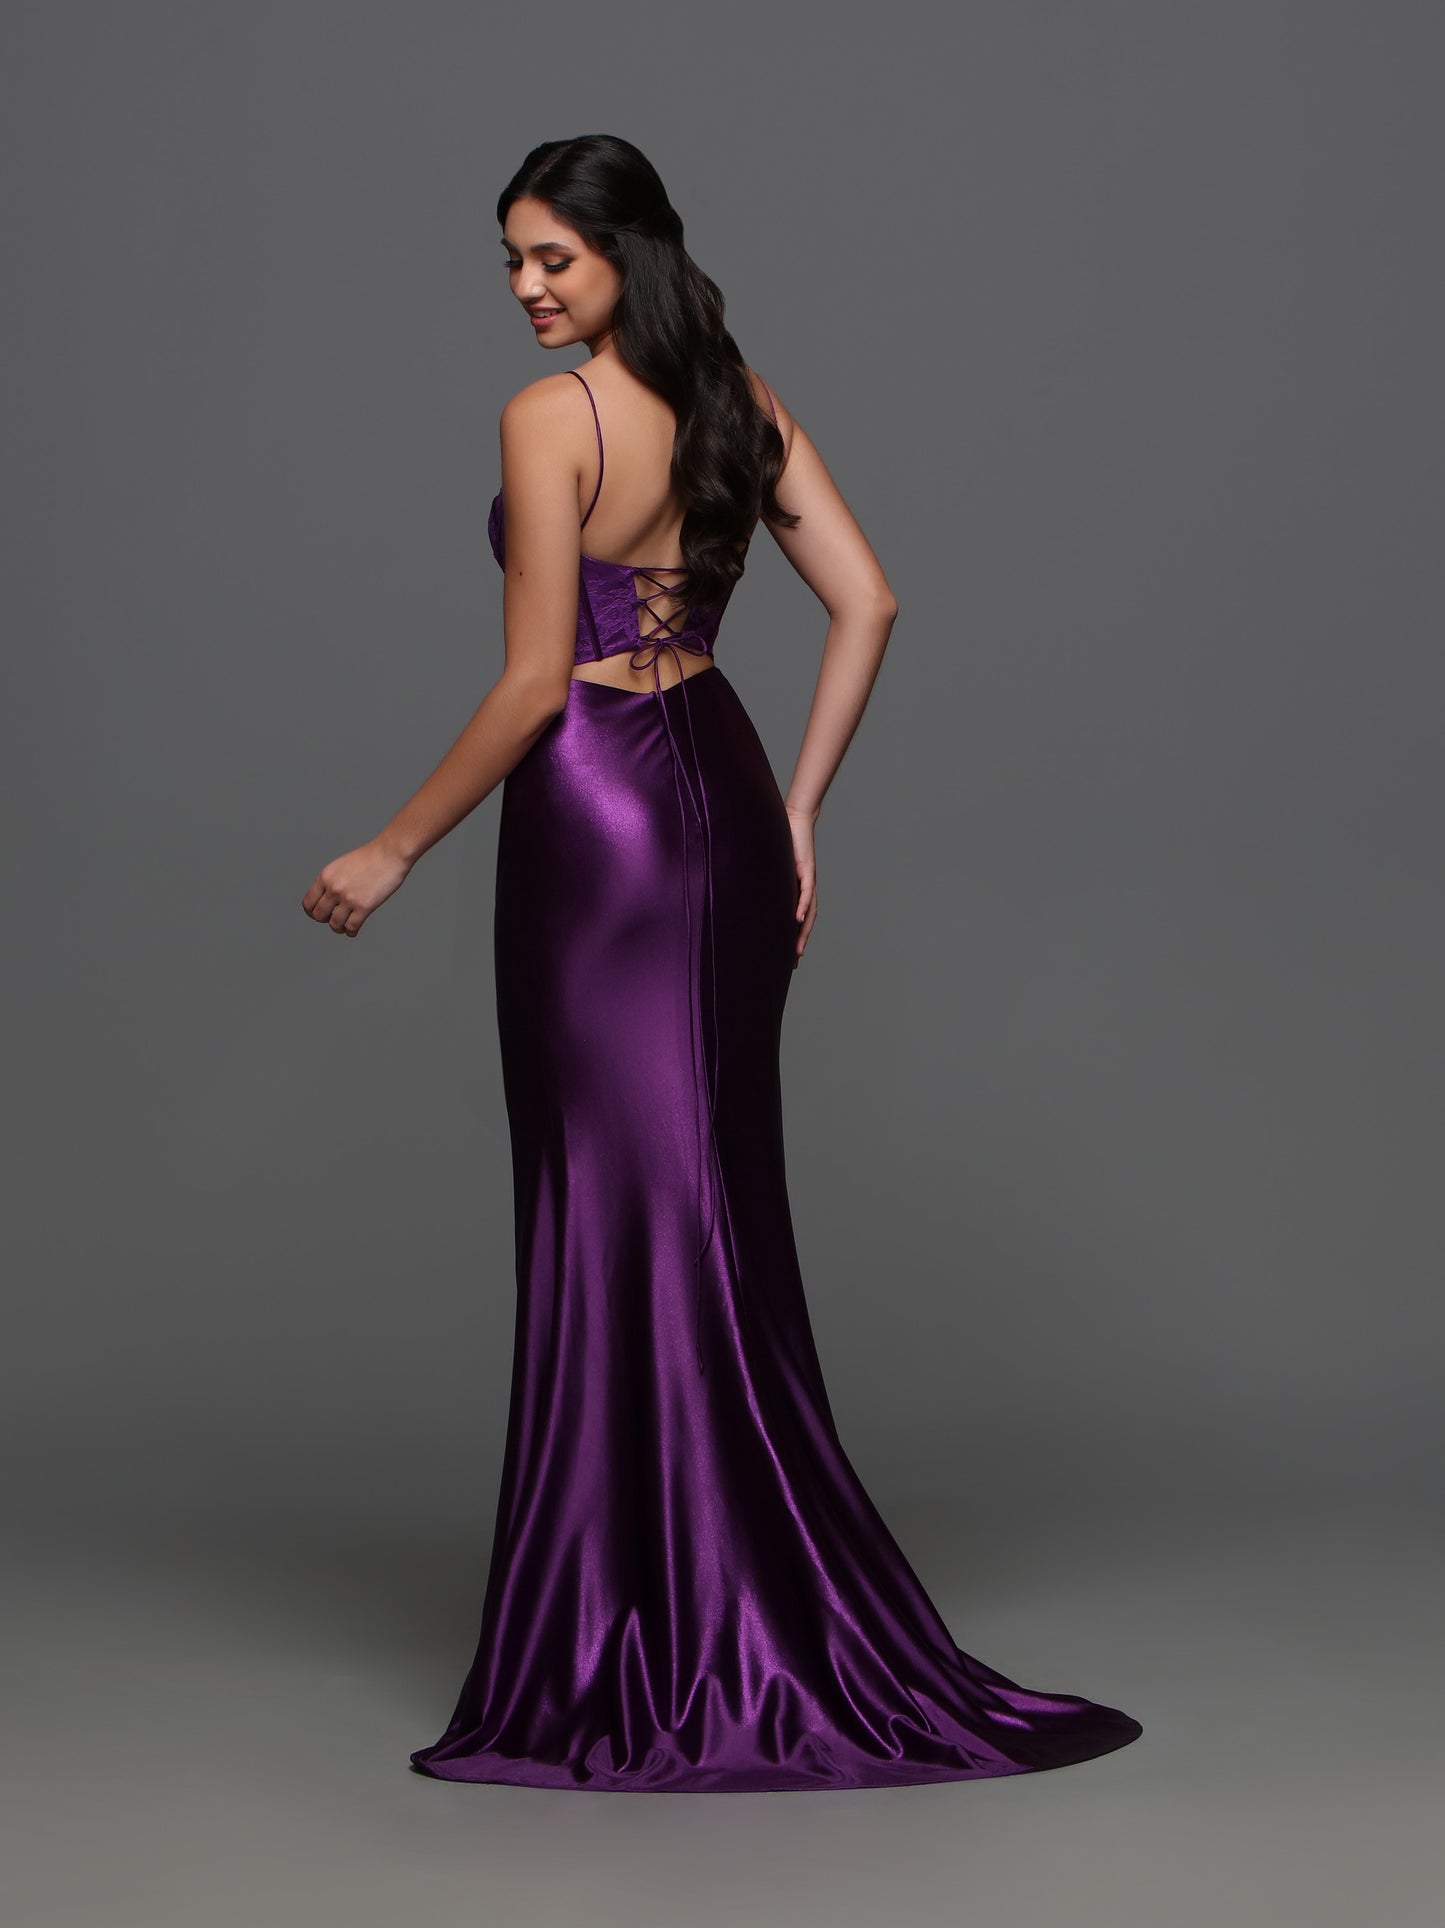 The Candice Wang 72392 Lace Corset Satin Dress is the perfect choice for your formal event. The fitted silhouette and corset lace detailing accentuate your figure, while the cut out back and slit add a touch of elegance. Made with high quality satin, this dress is both comfortable and luxurious.  Sizes: 0-16  Colors: Purple, Royal